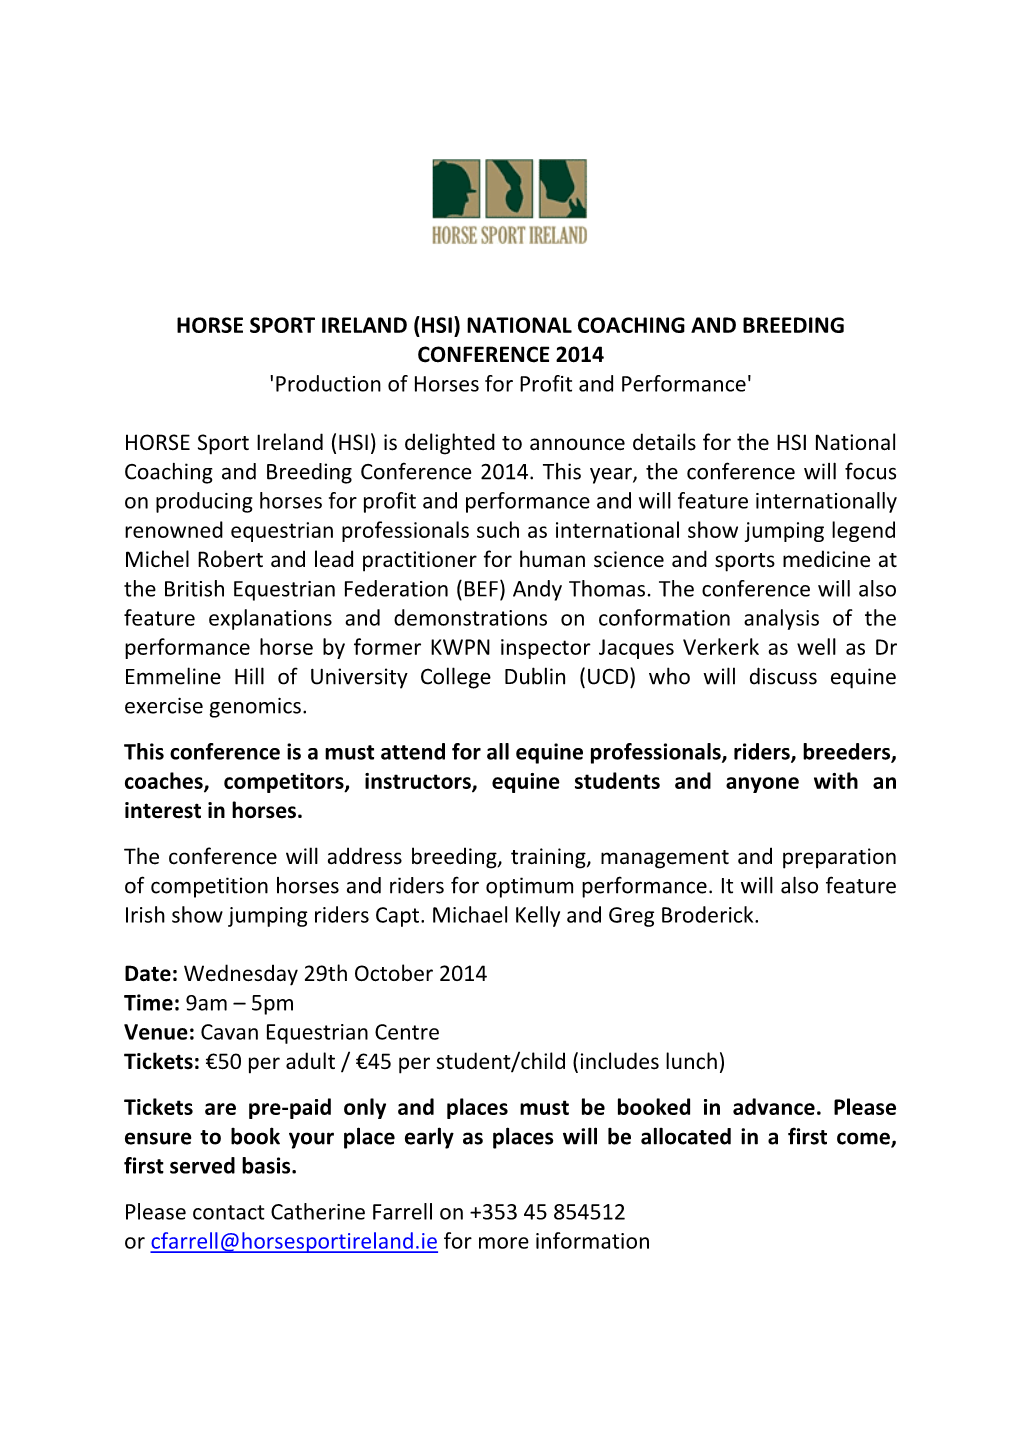 HORSE SPORT IRELAND (HSI) NATIONAL COACHING and BREEDING CONFERENCE 2014 'Production of Horses for Profit and Performance'